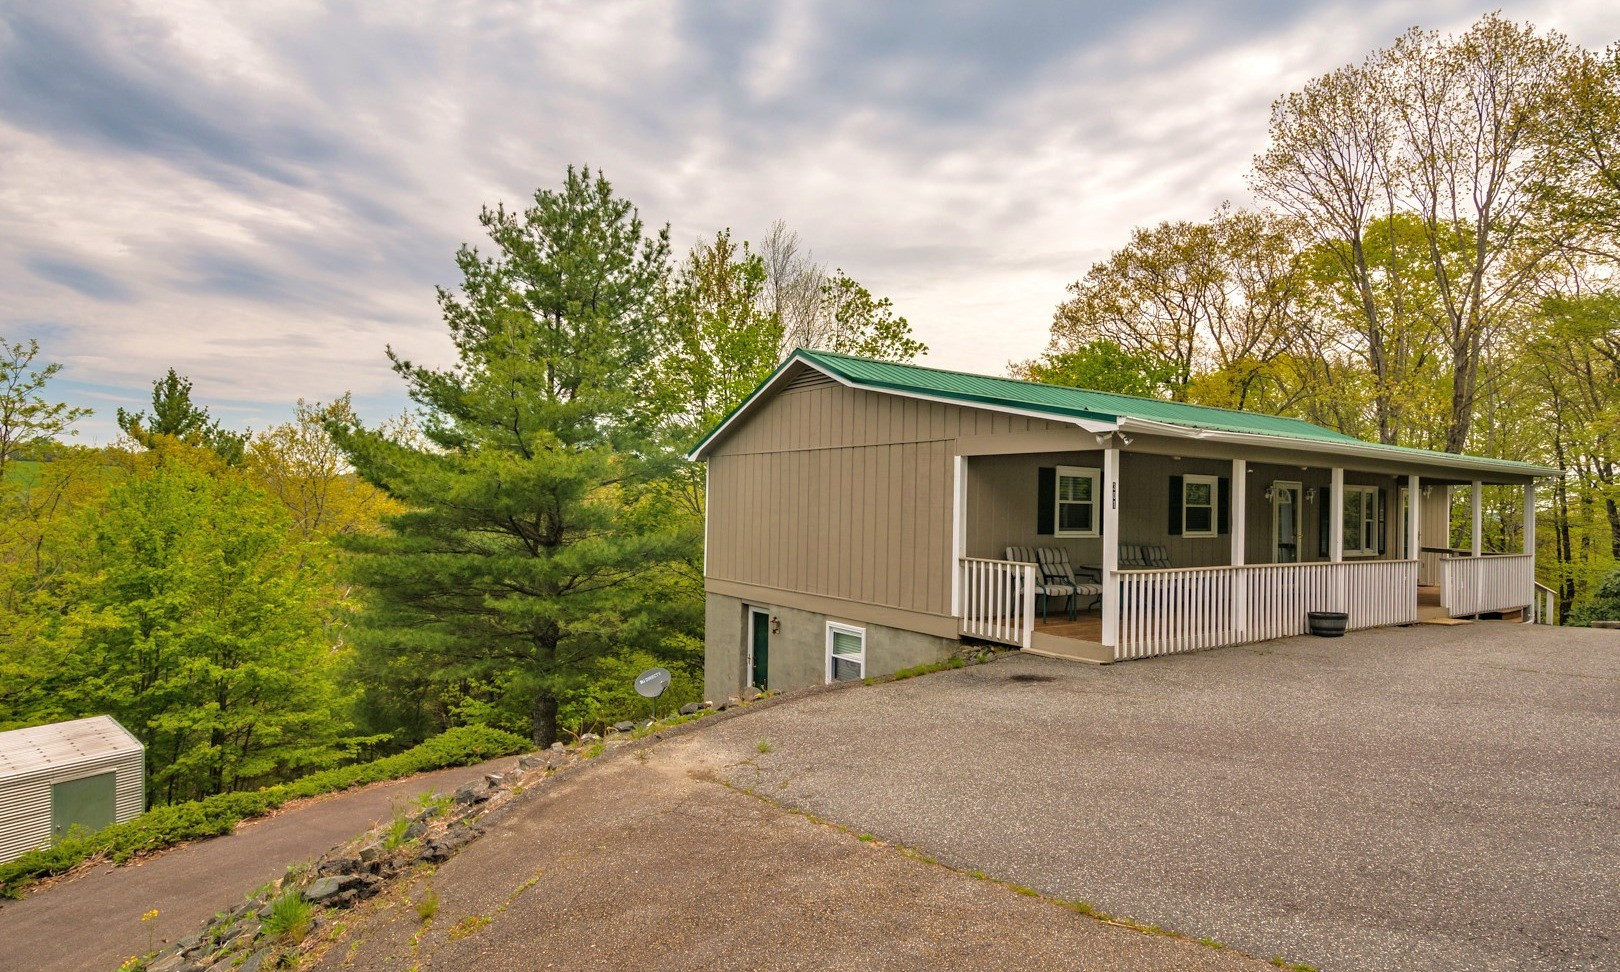 Located just minutes to Downtown West Jefferson, this 3-bedroom, 2-bath NC Mountain ranch style home overs easy one level living on a peaceful 1.4 acre setting with mountain views.